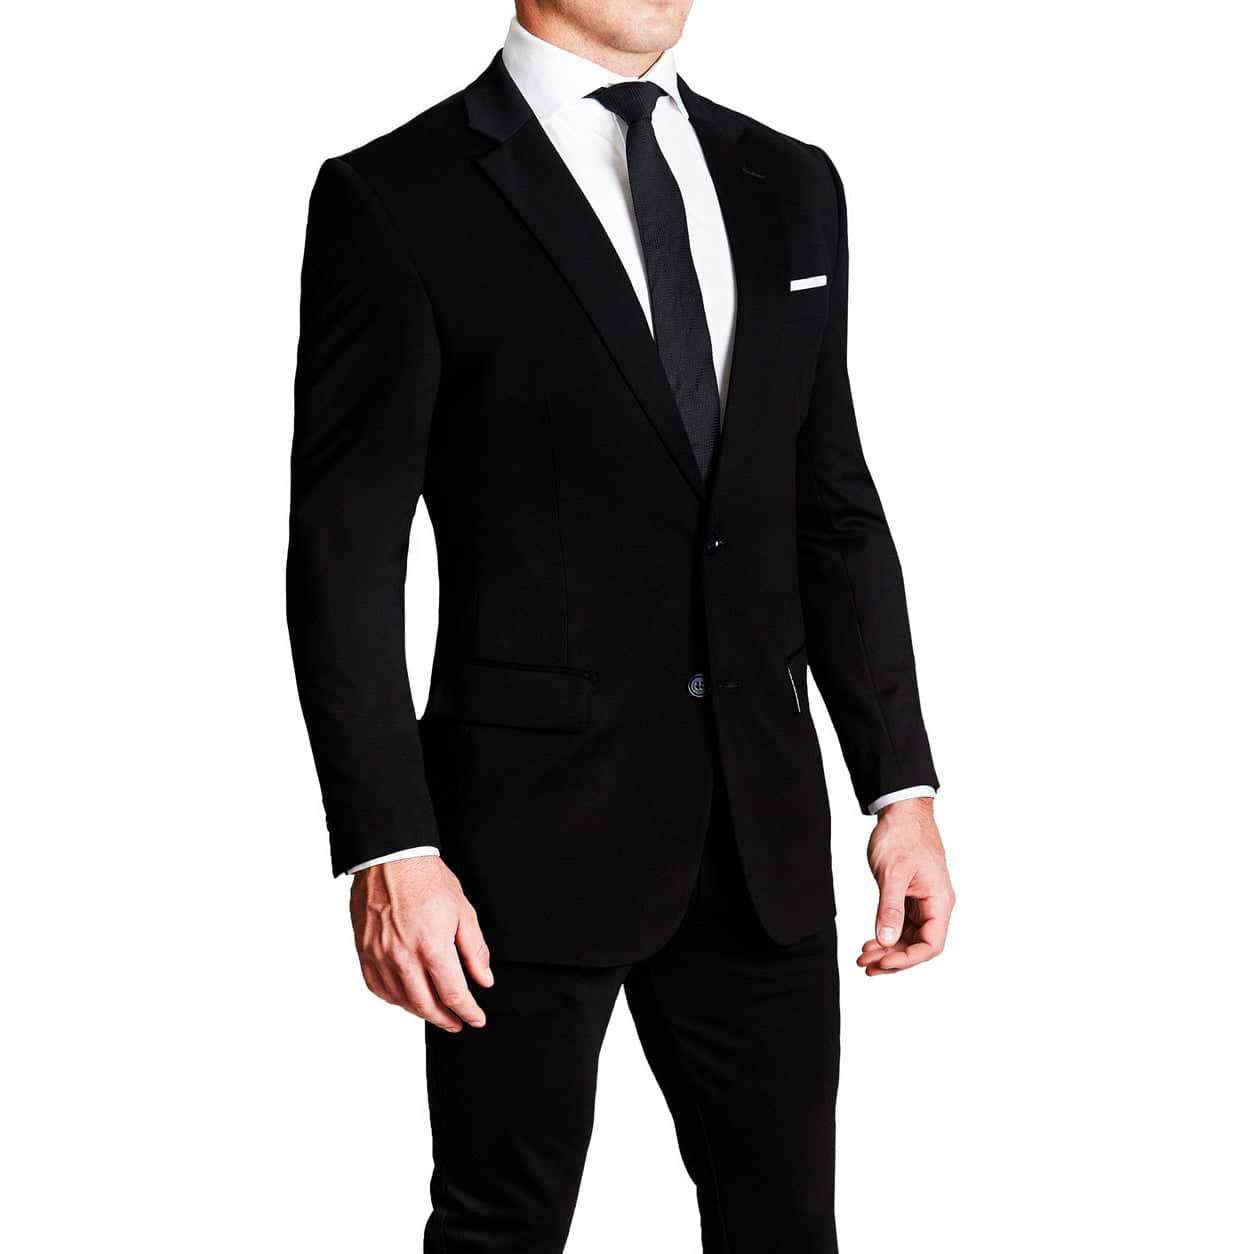 Classic Black Tuxedo With Gray Vest and Bow Tie